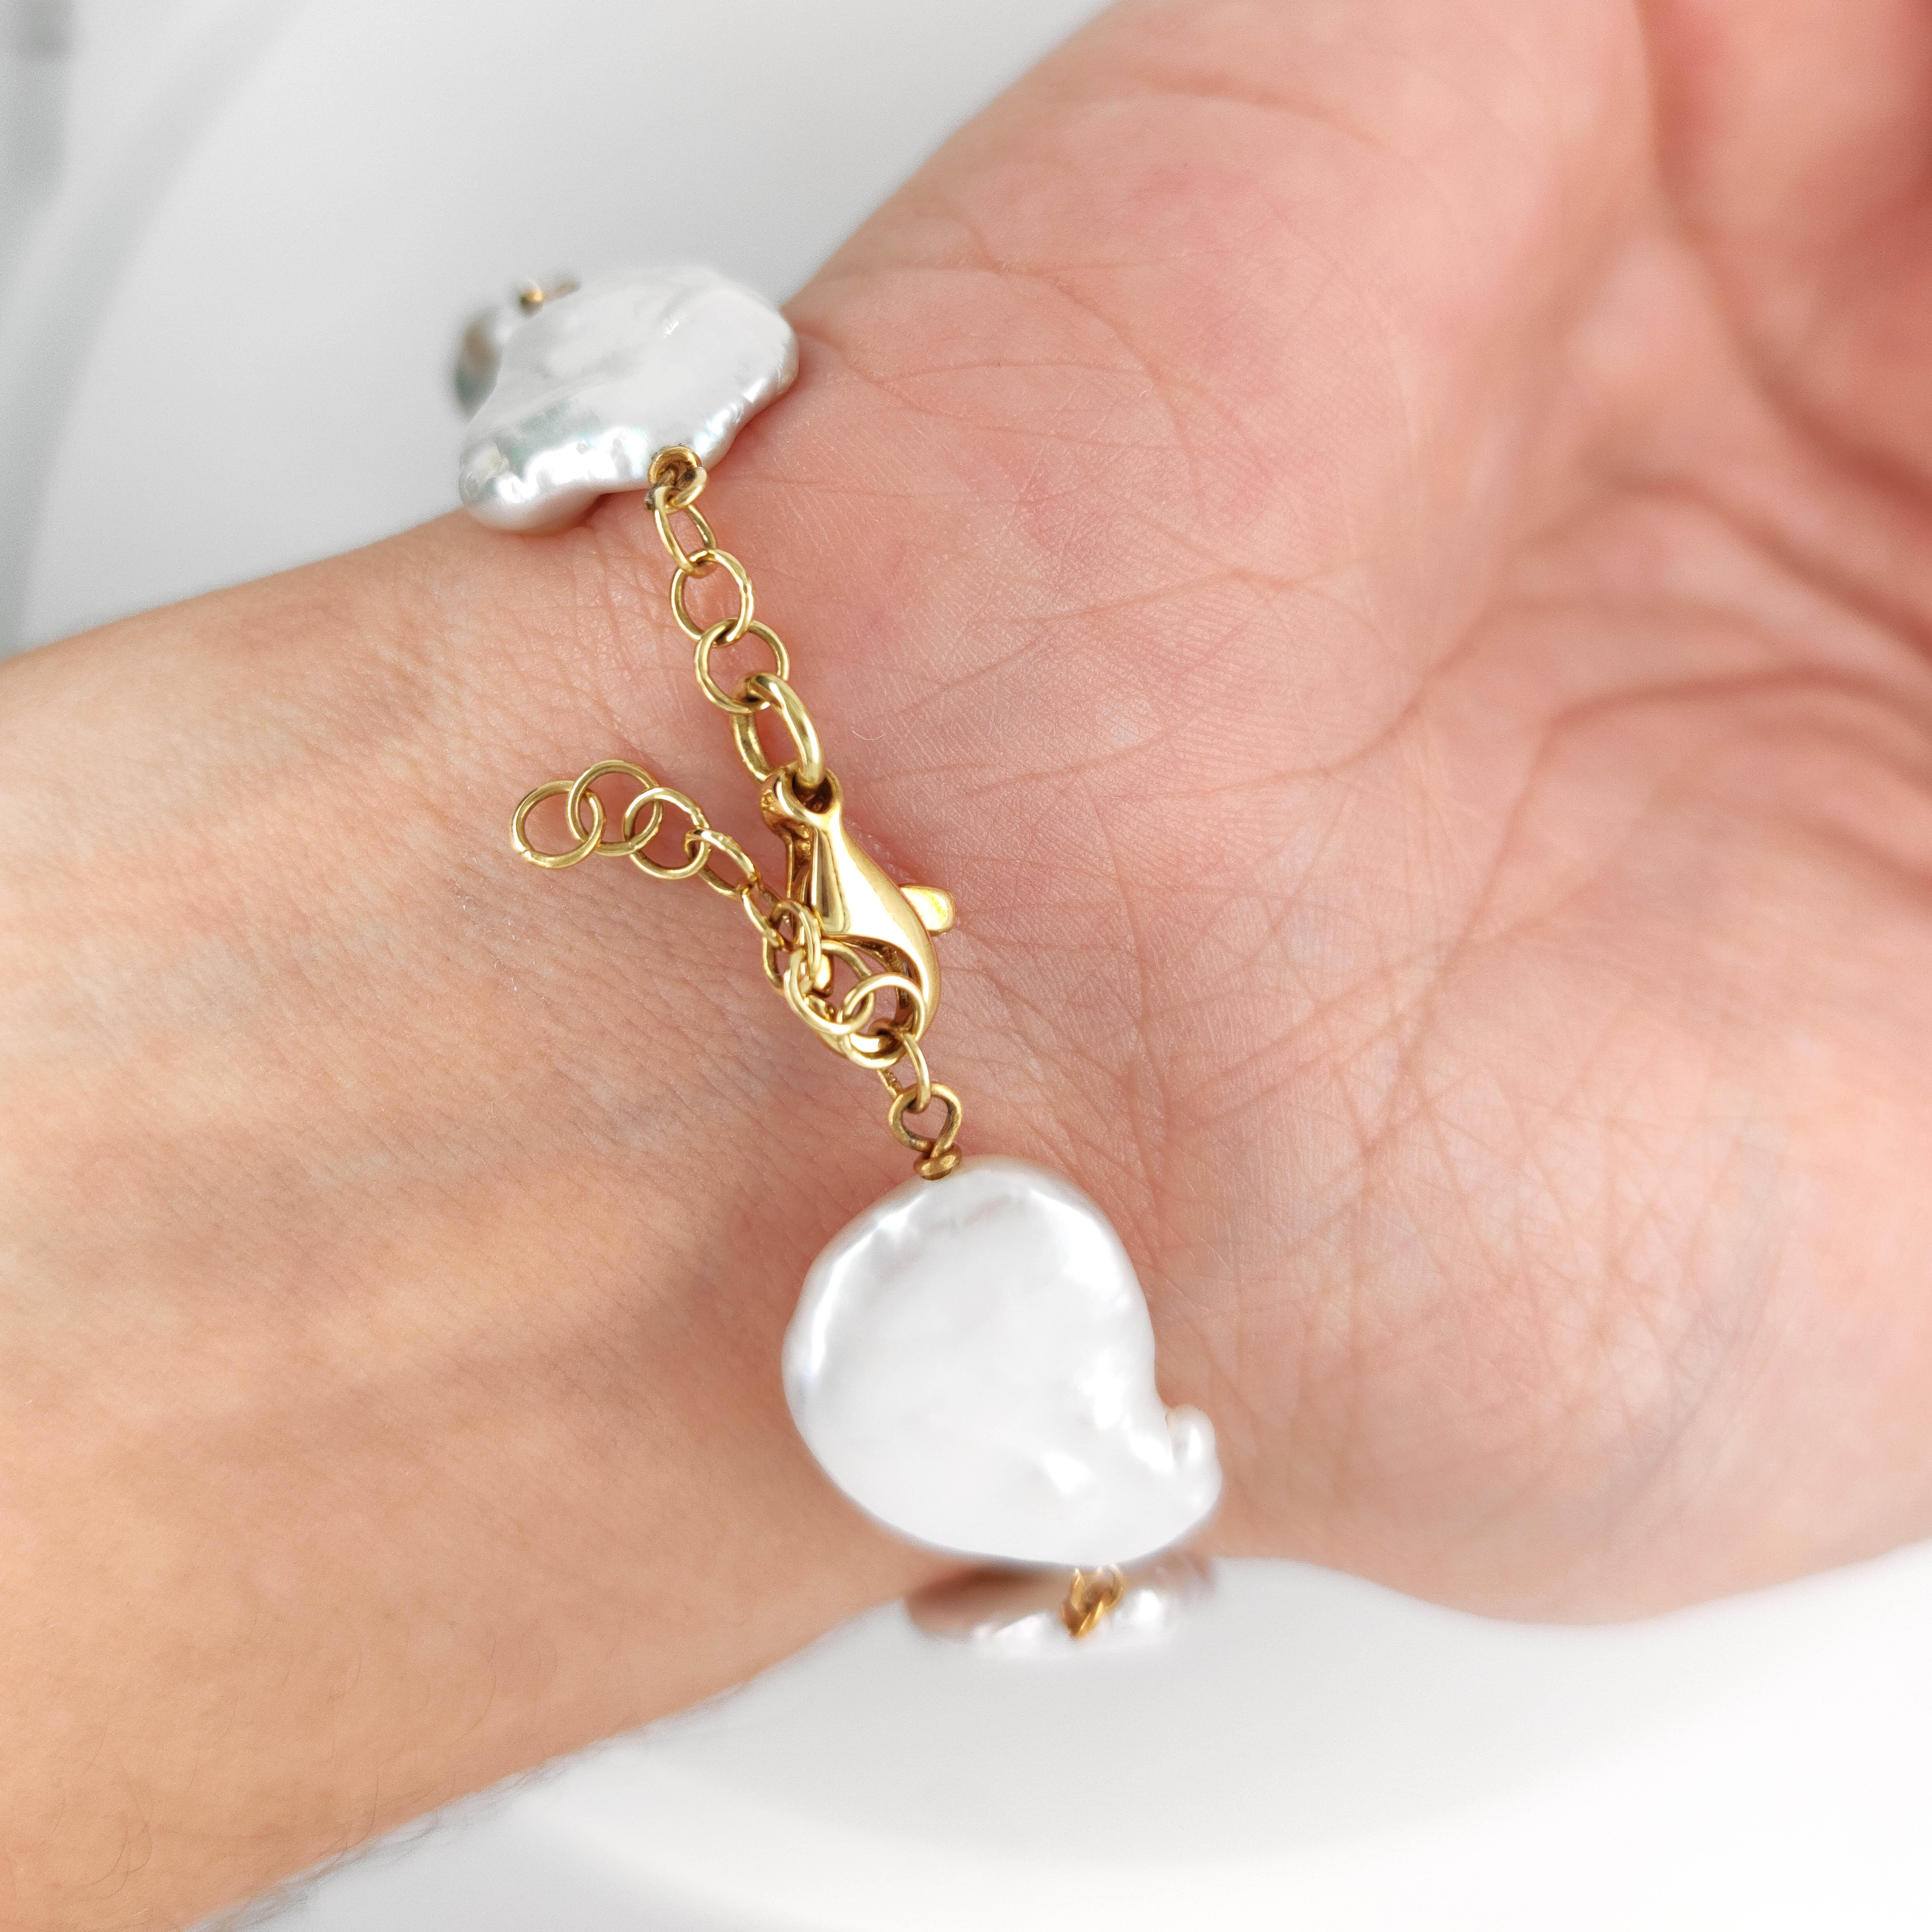 Brilliant Cut 18kt Yellow Gold bracelet with flower in Citrine quartz, pearls and diamond For Sale